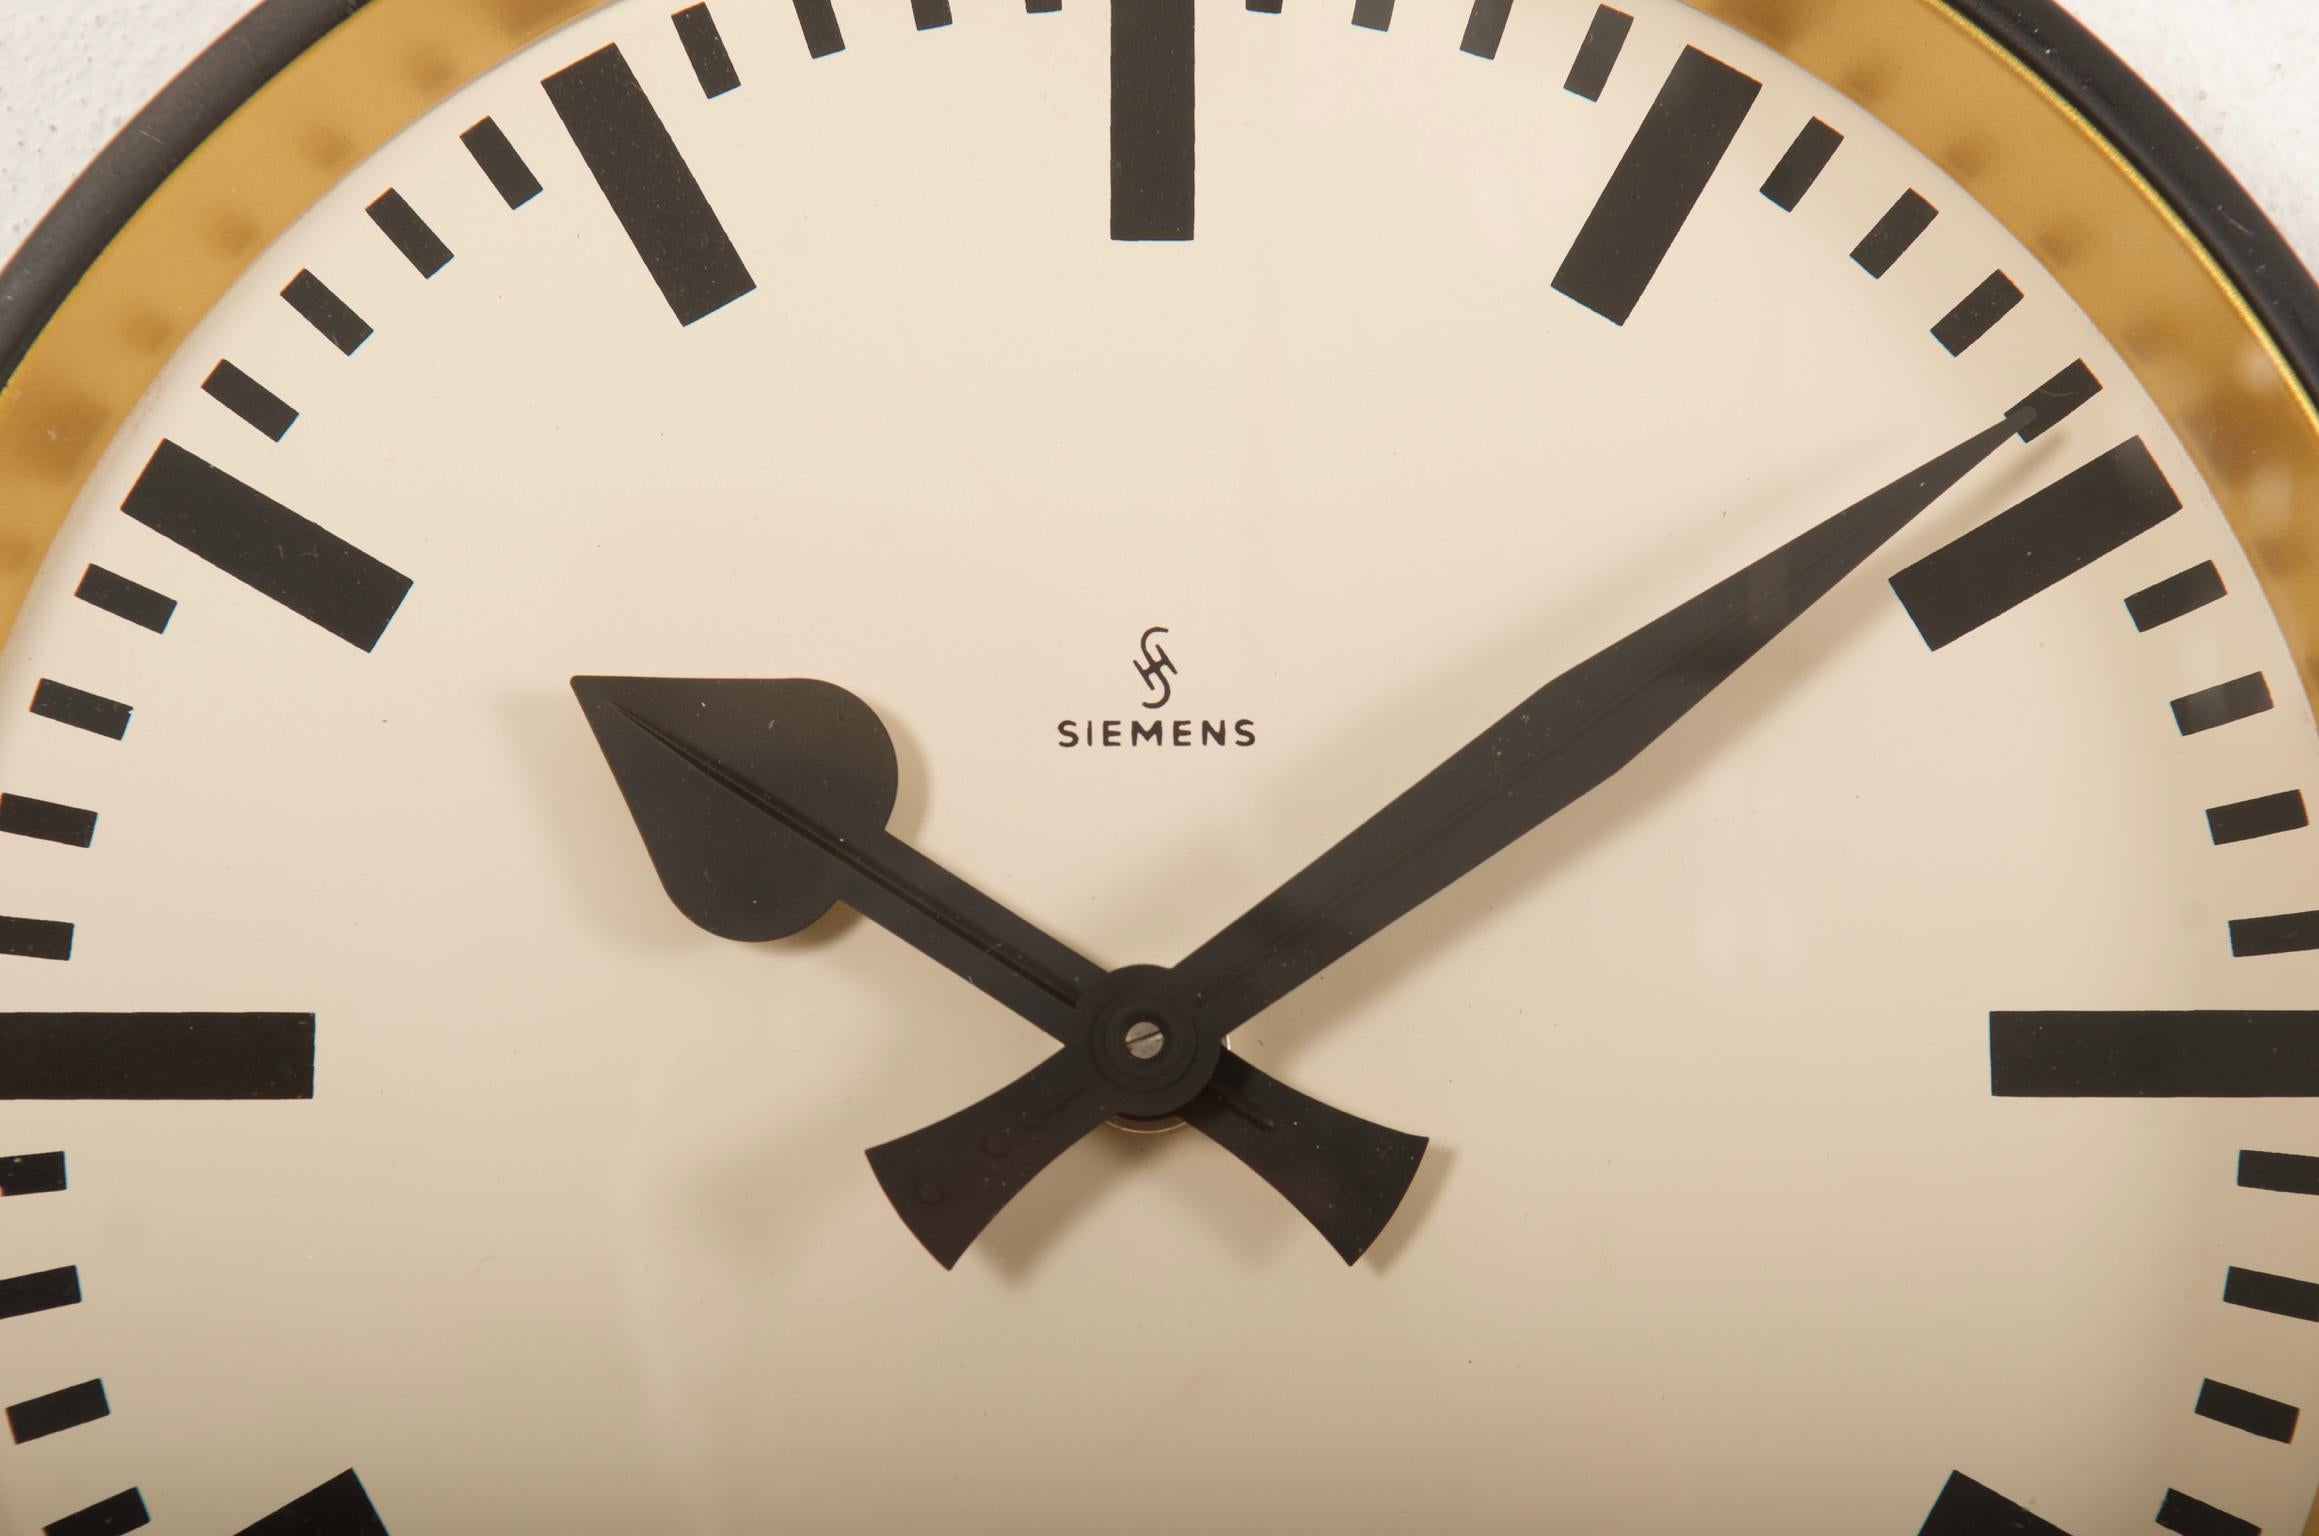 Siemens Factory, Station or Workshop Wall Clock In Good Condition For Sale In Vienna, AT